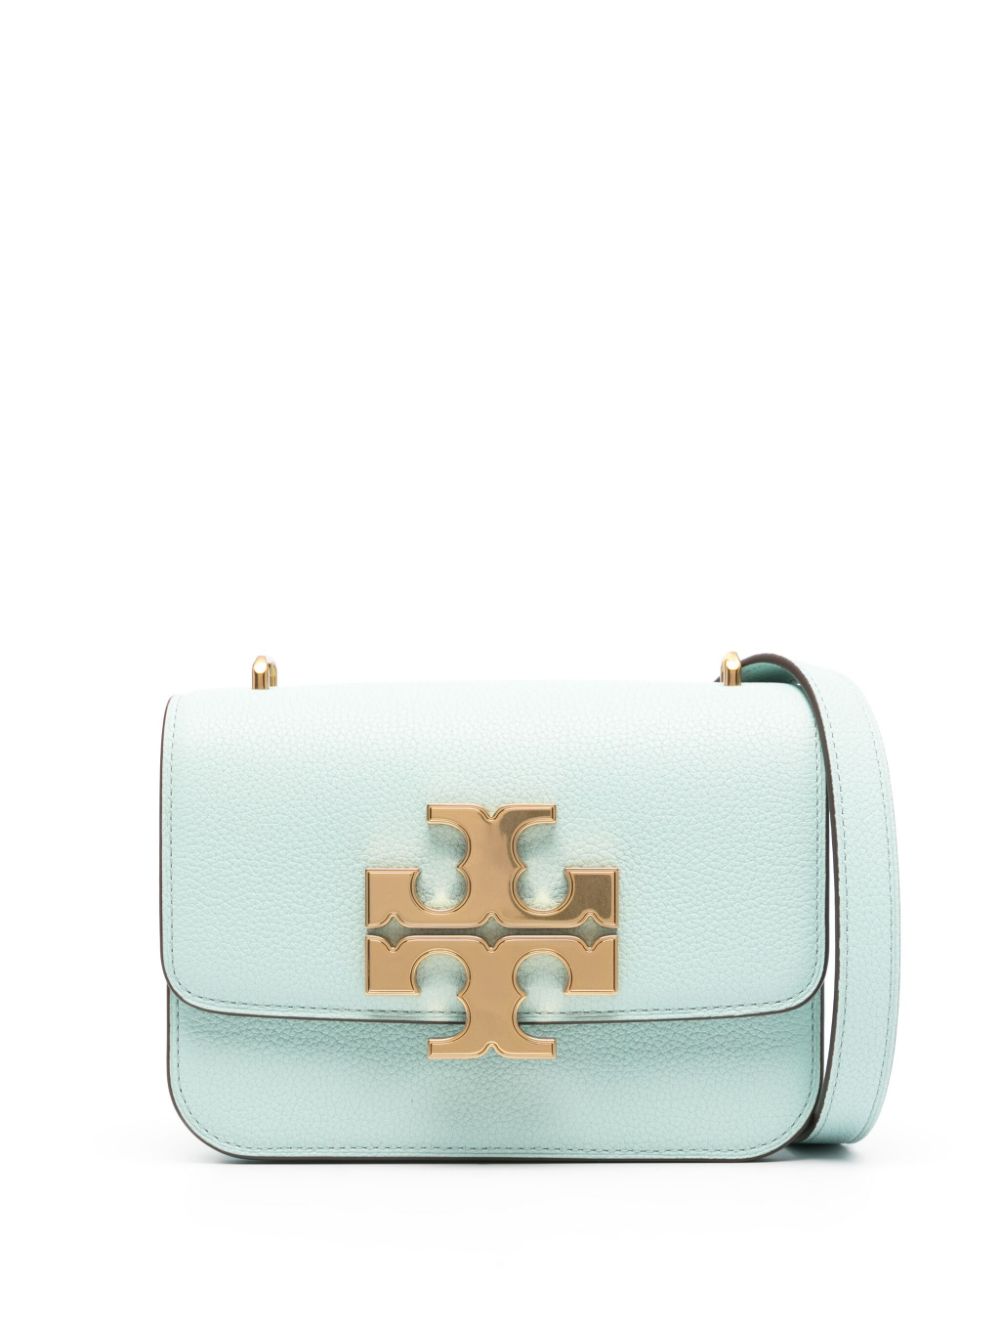 Tory Burch TORY BURCH- Eleanor Small Leather Shoulder Bag